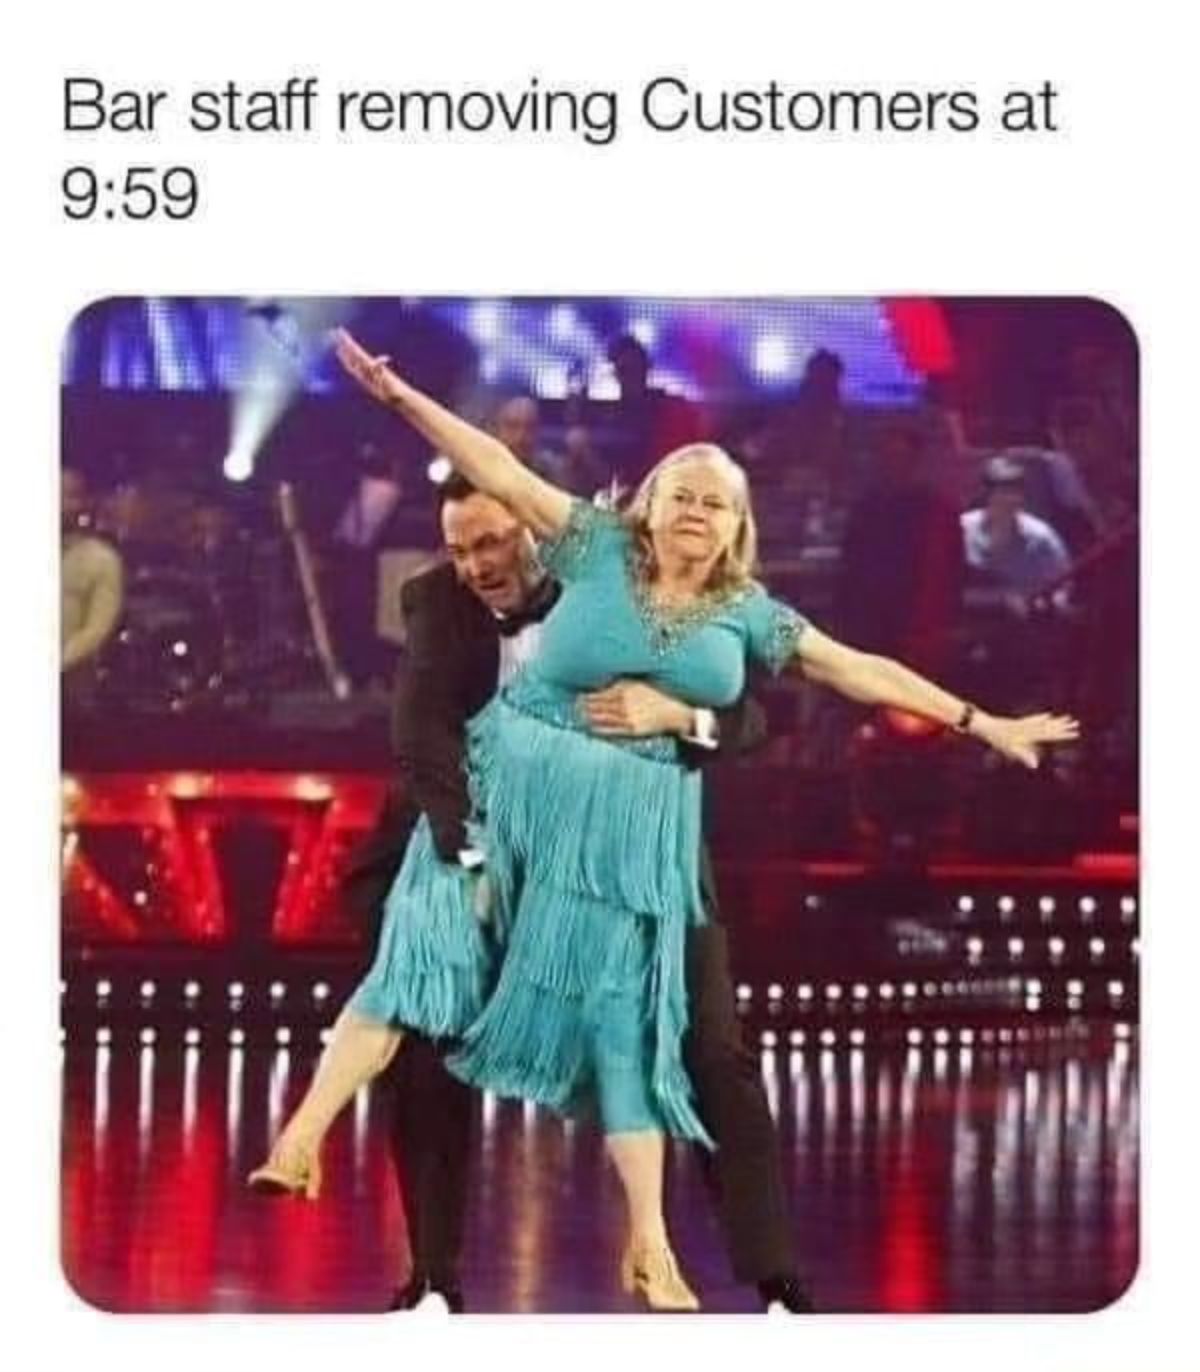 funny strictly come dancing memes - Bar staff removing Customers at